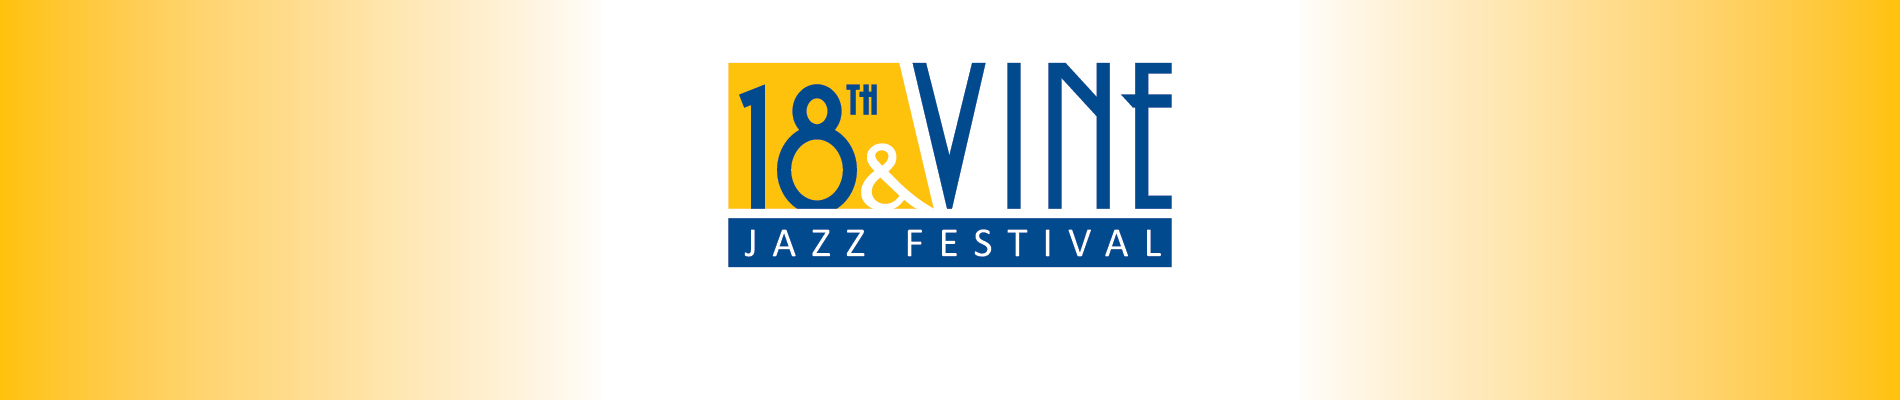 18th and Vine Jazz Festival